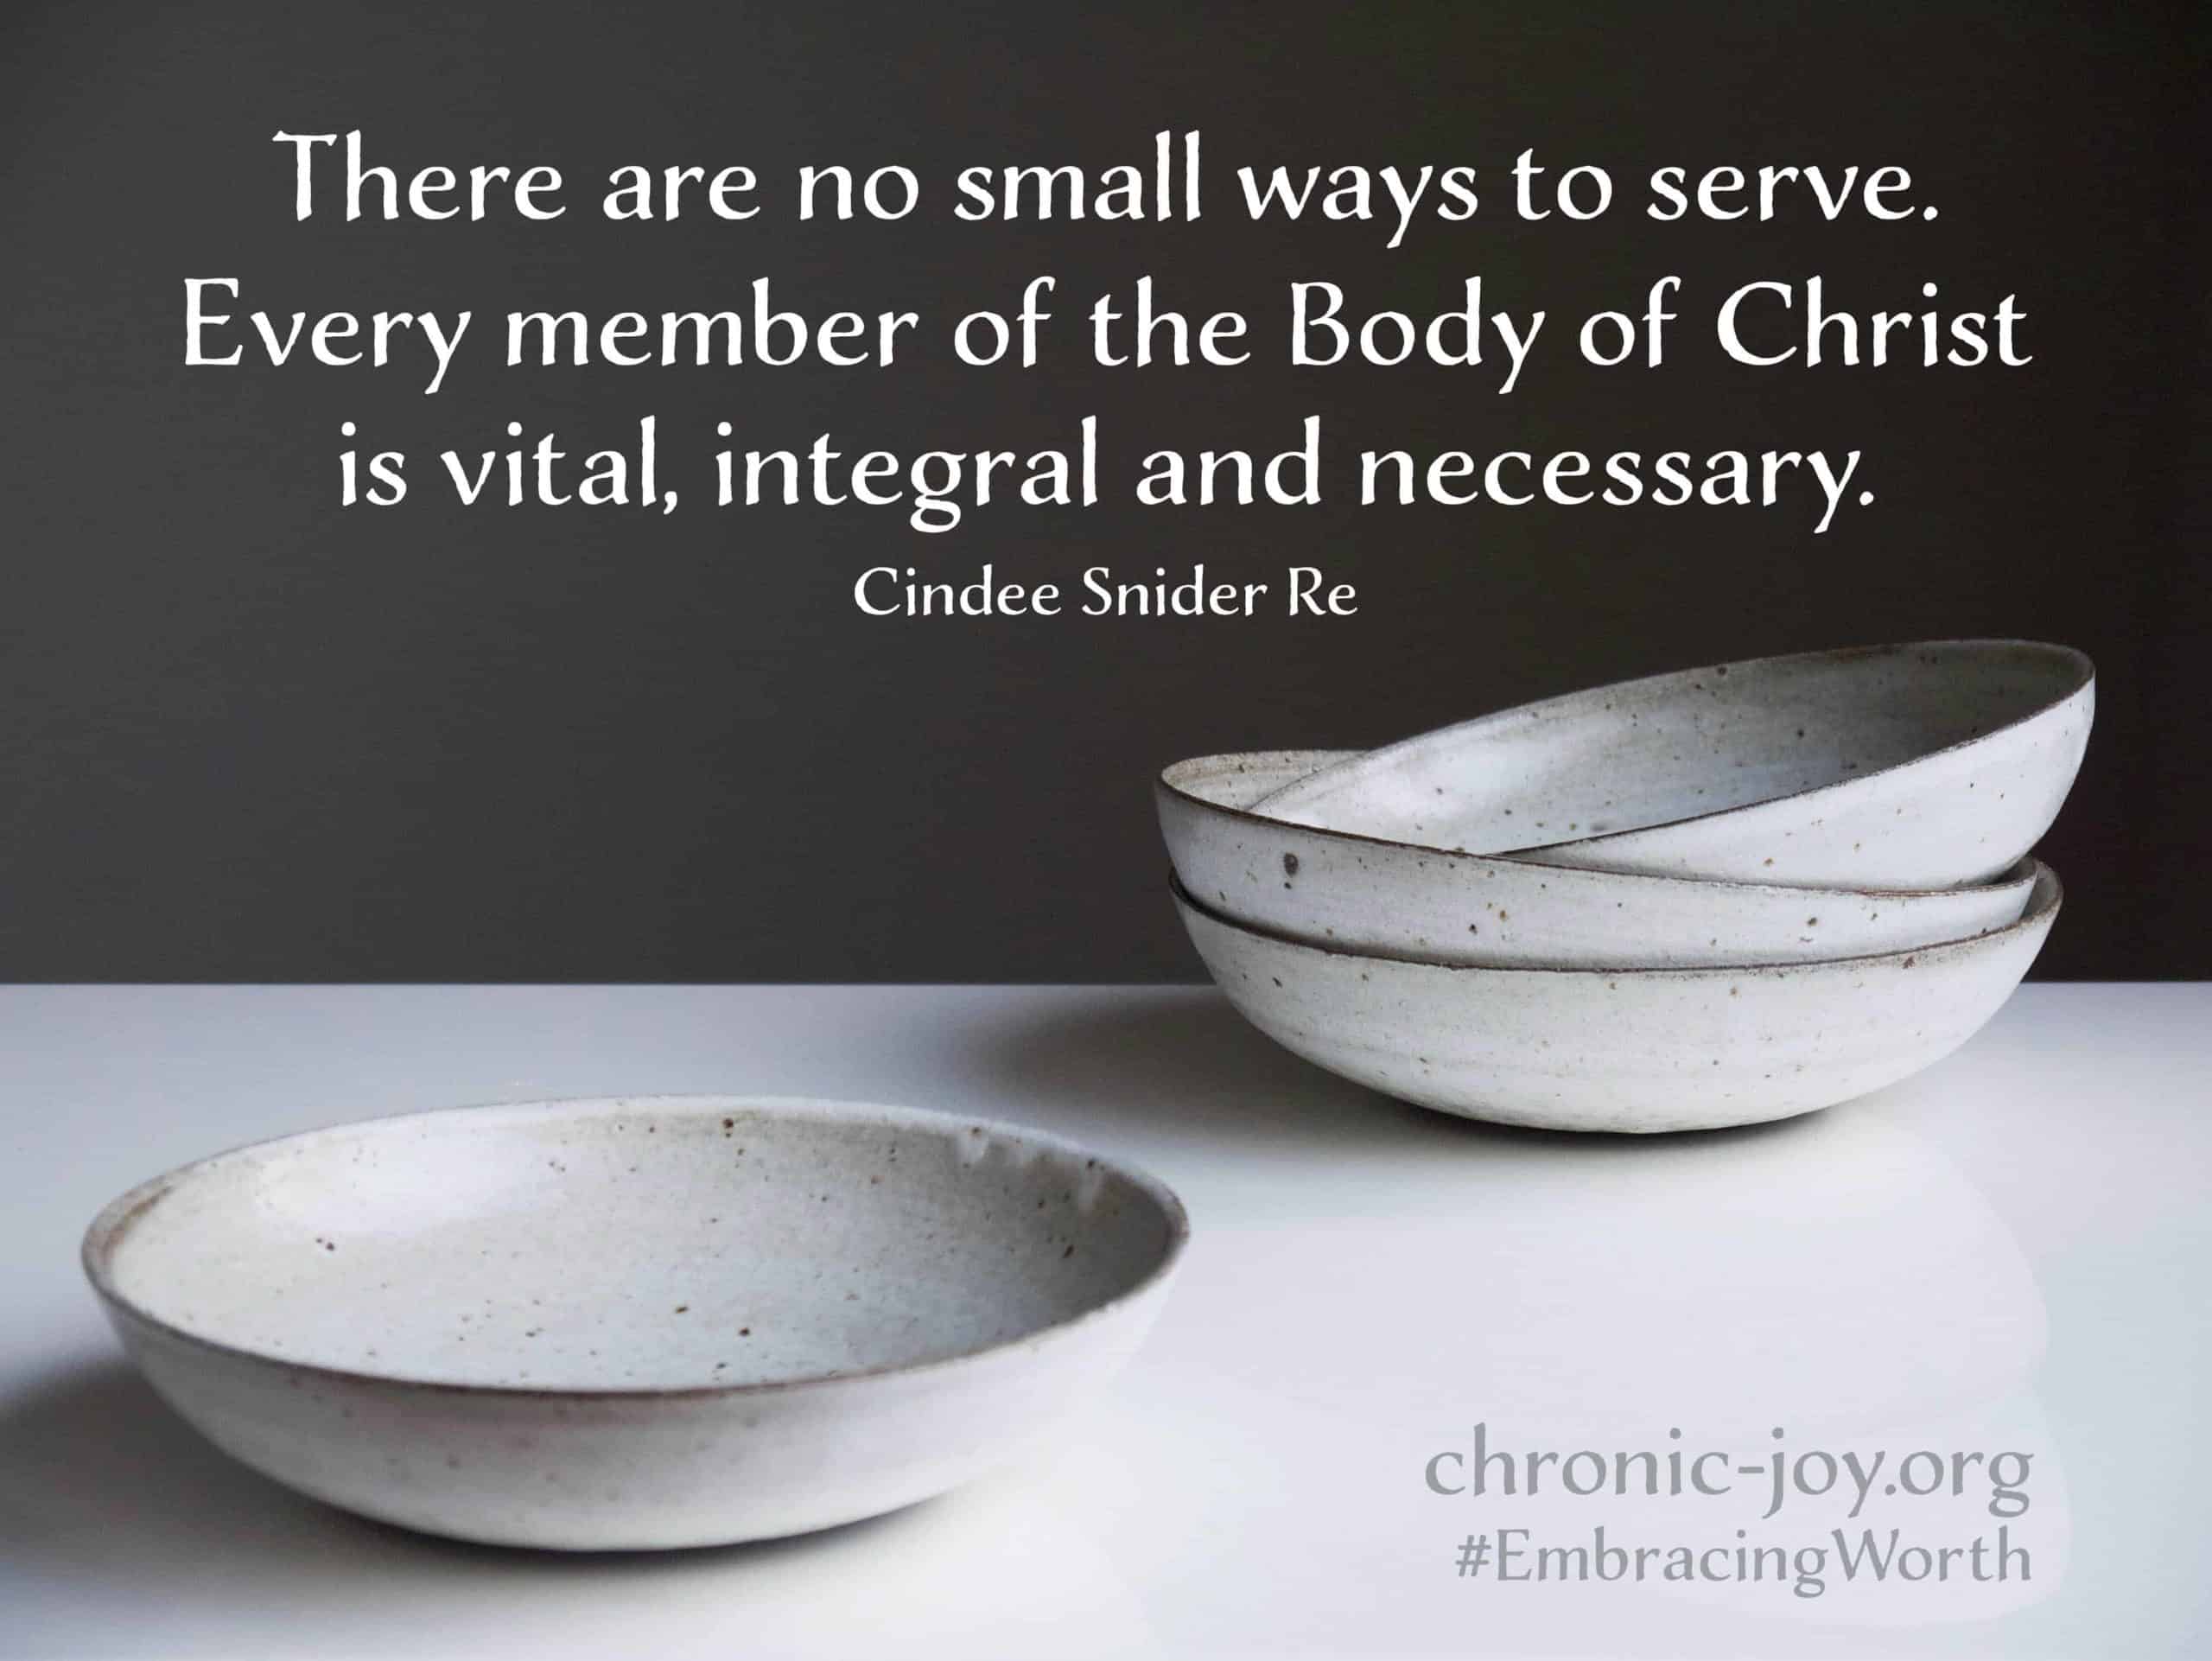 "There are no small ways to serve. Every member of the Body of Christ is vital, integral, and necessary." Cindee Snider Re